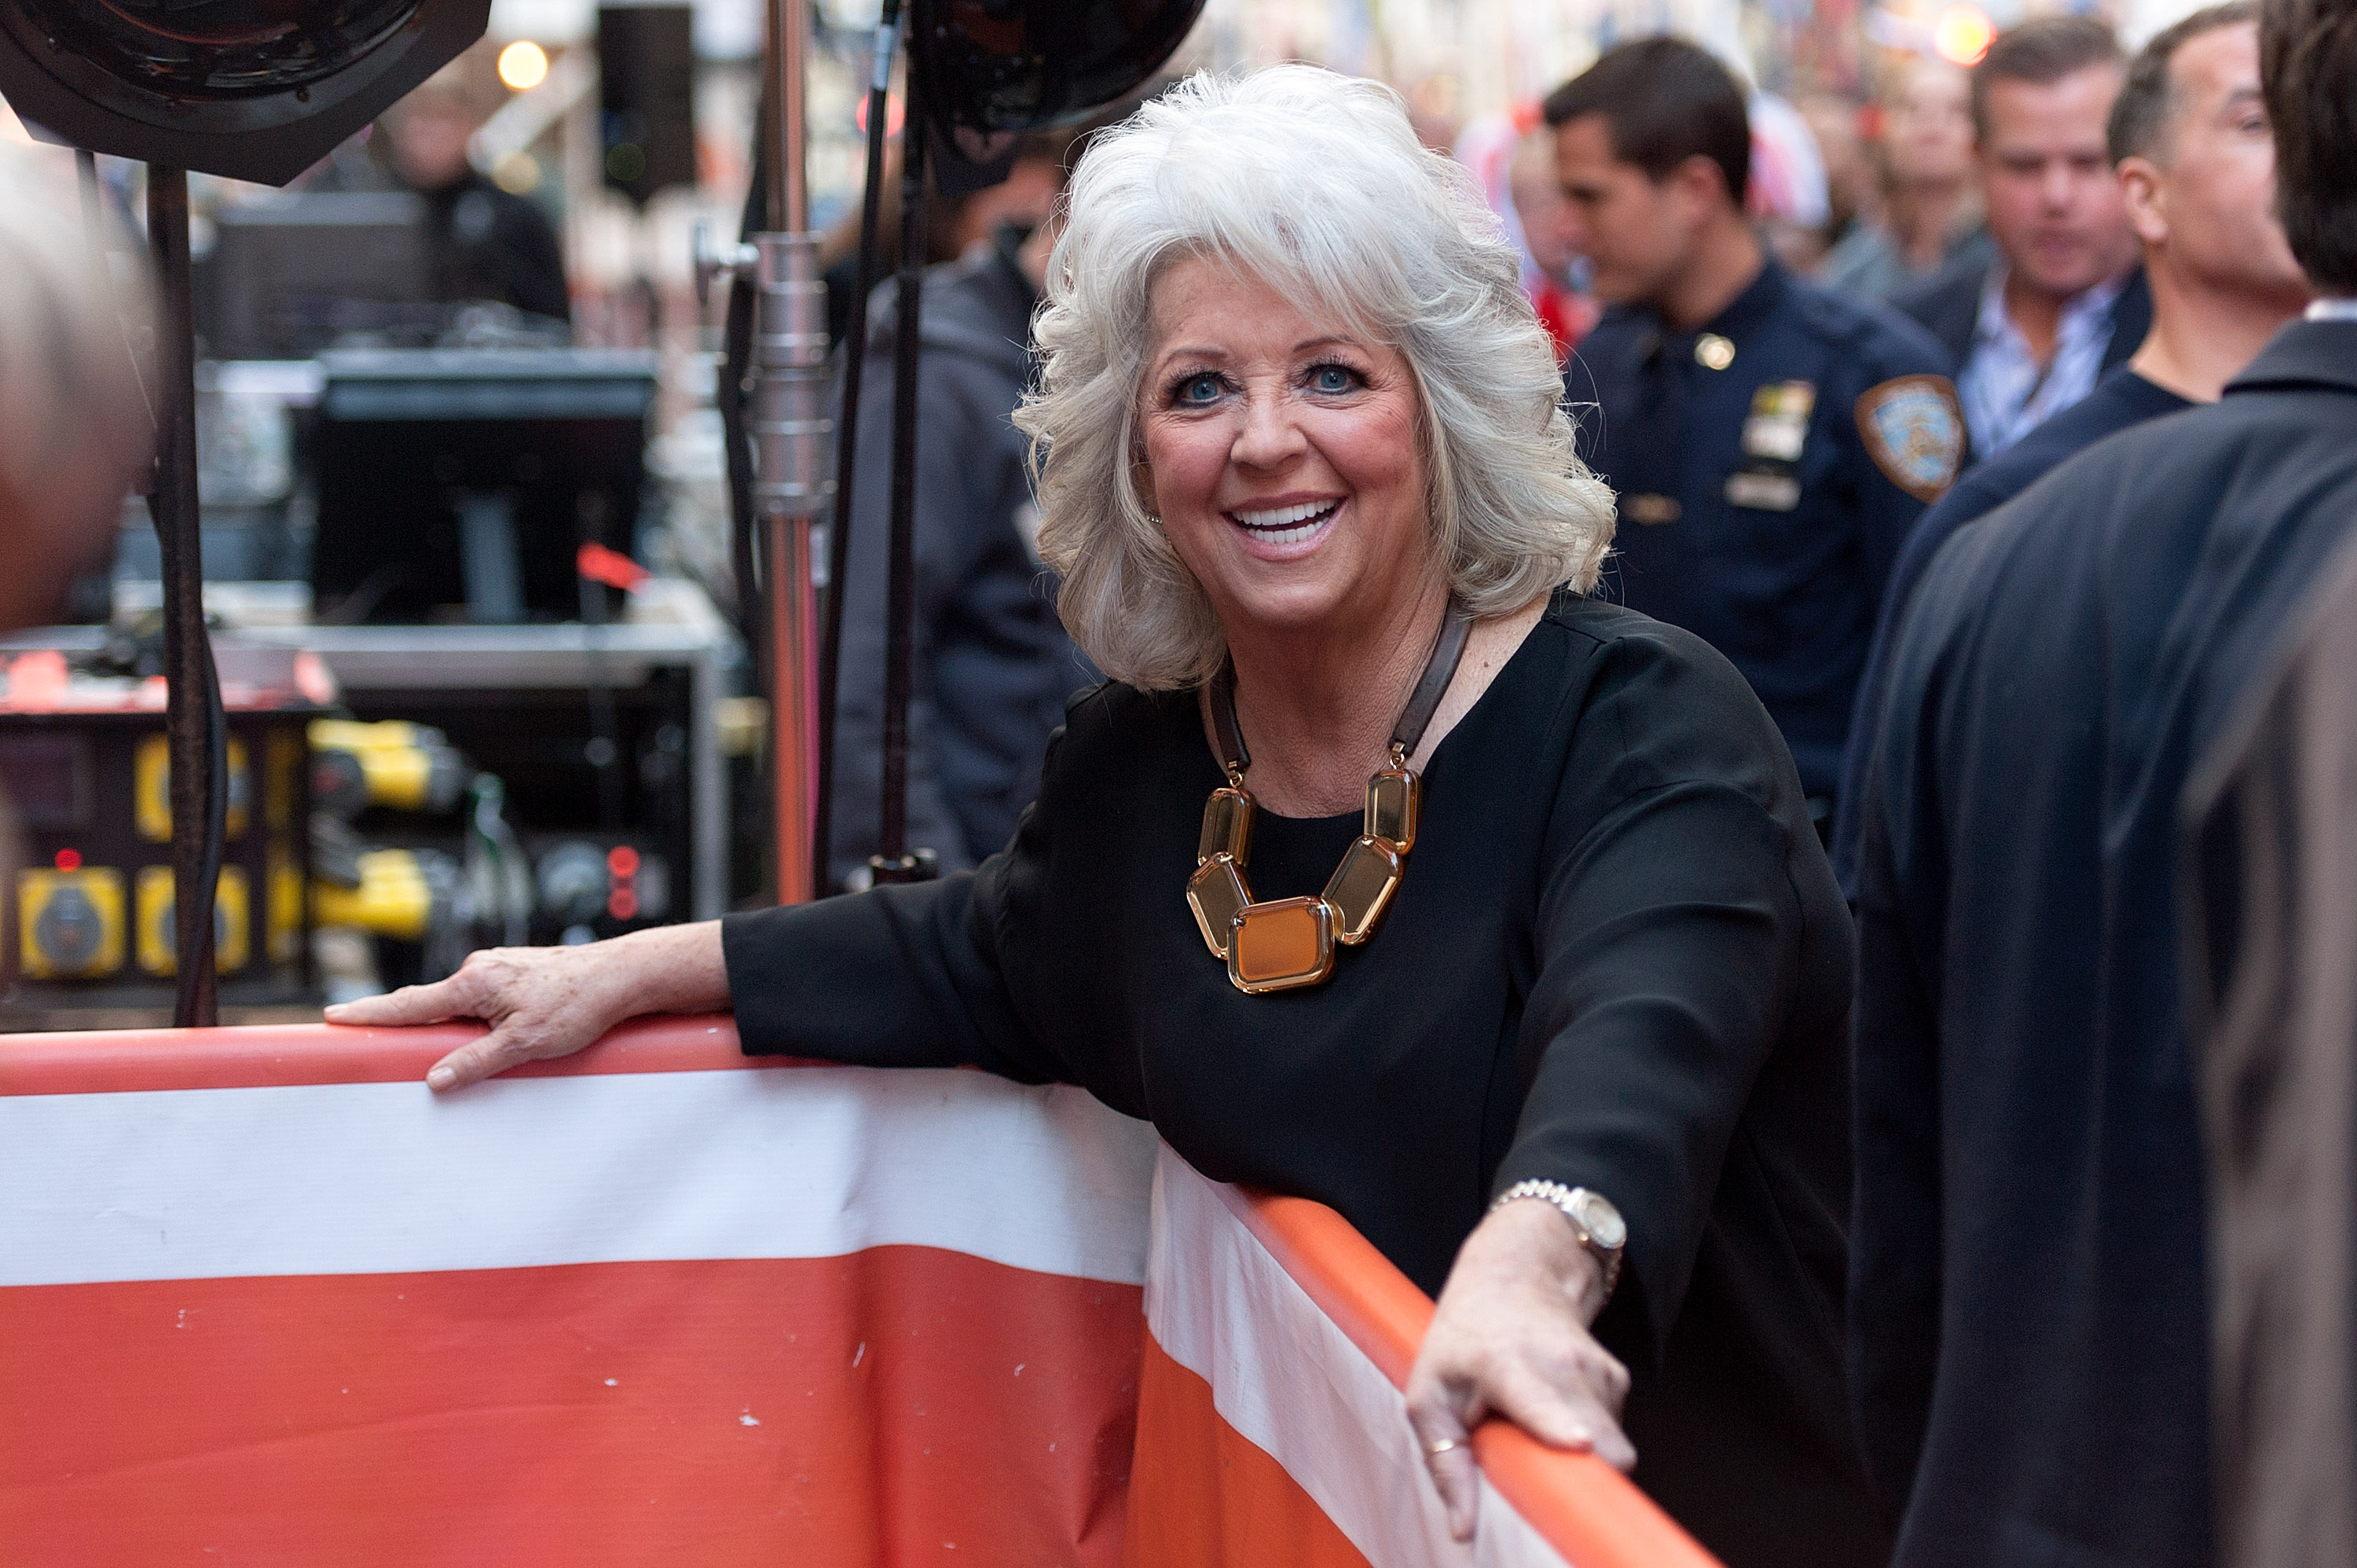 Paula Deen on the set of "Today" at NBC's TODAY Show in New York City on September 23, 2014. | Source: Getty Images